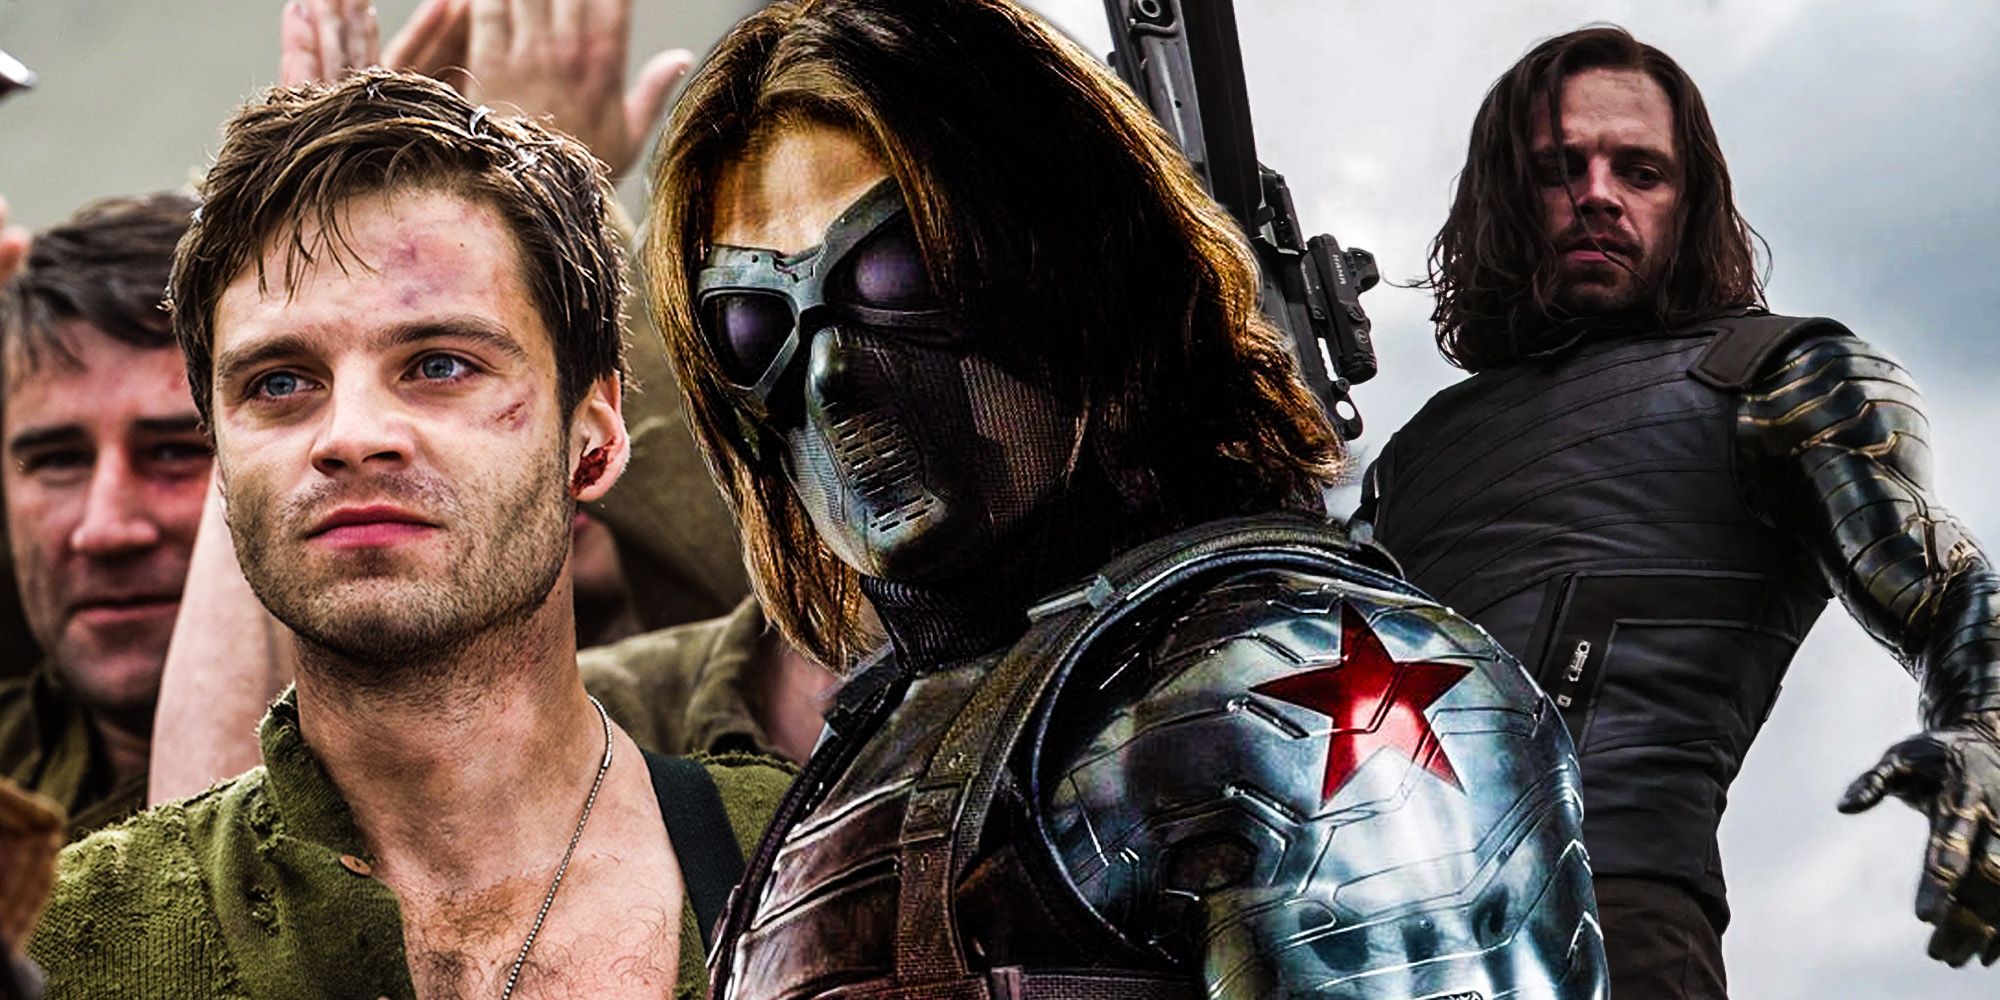 The Winter Soldier Complete Mcu Timeline Buckys Story Explained